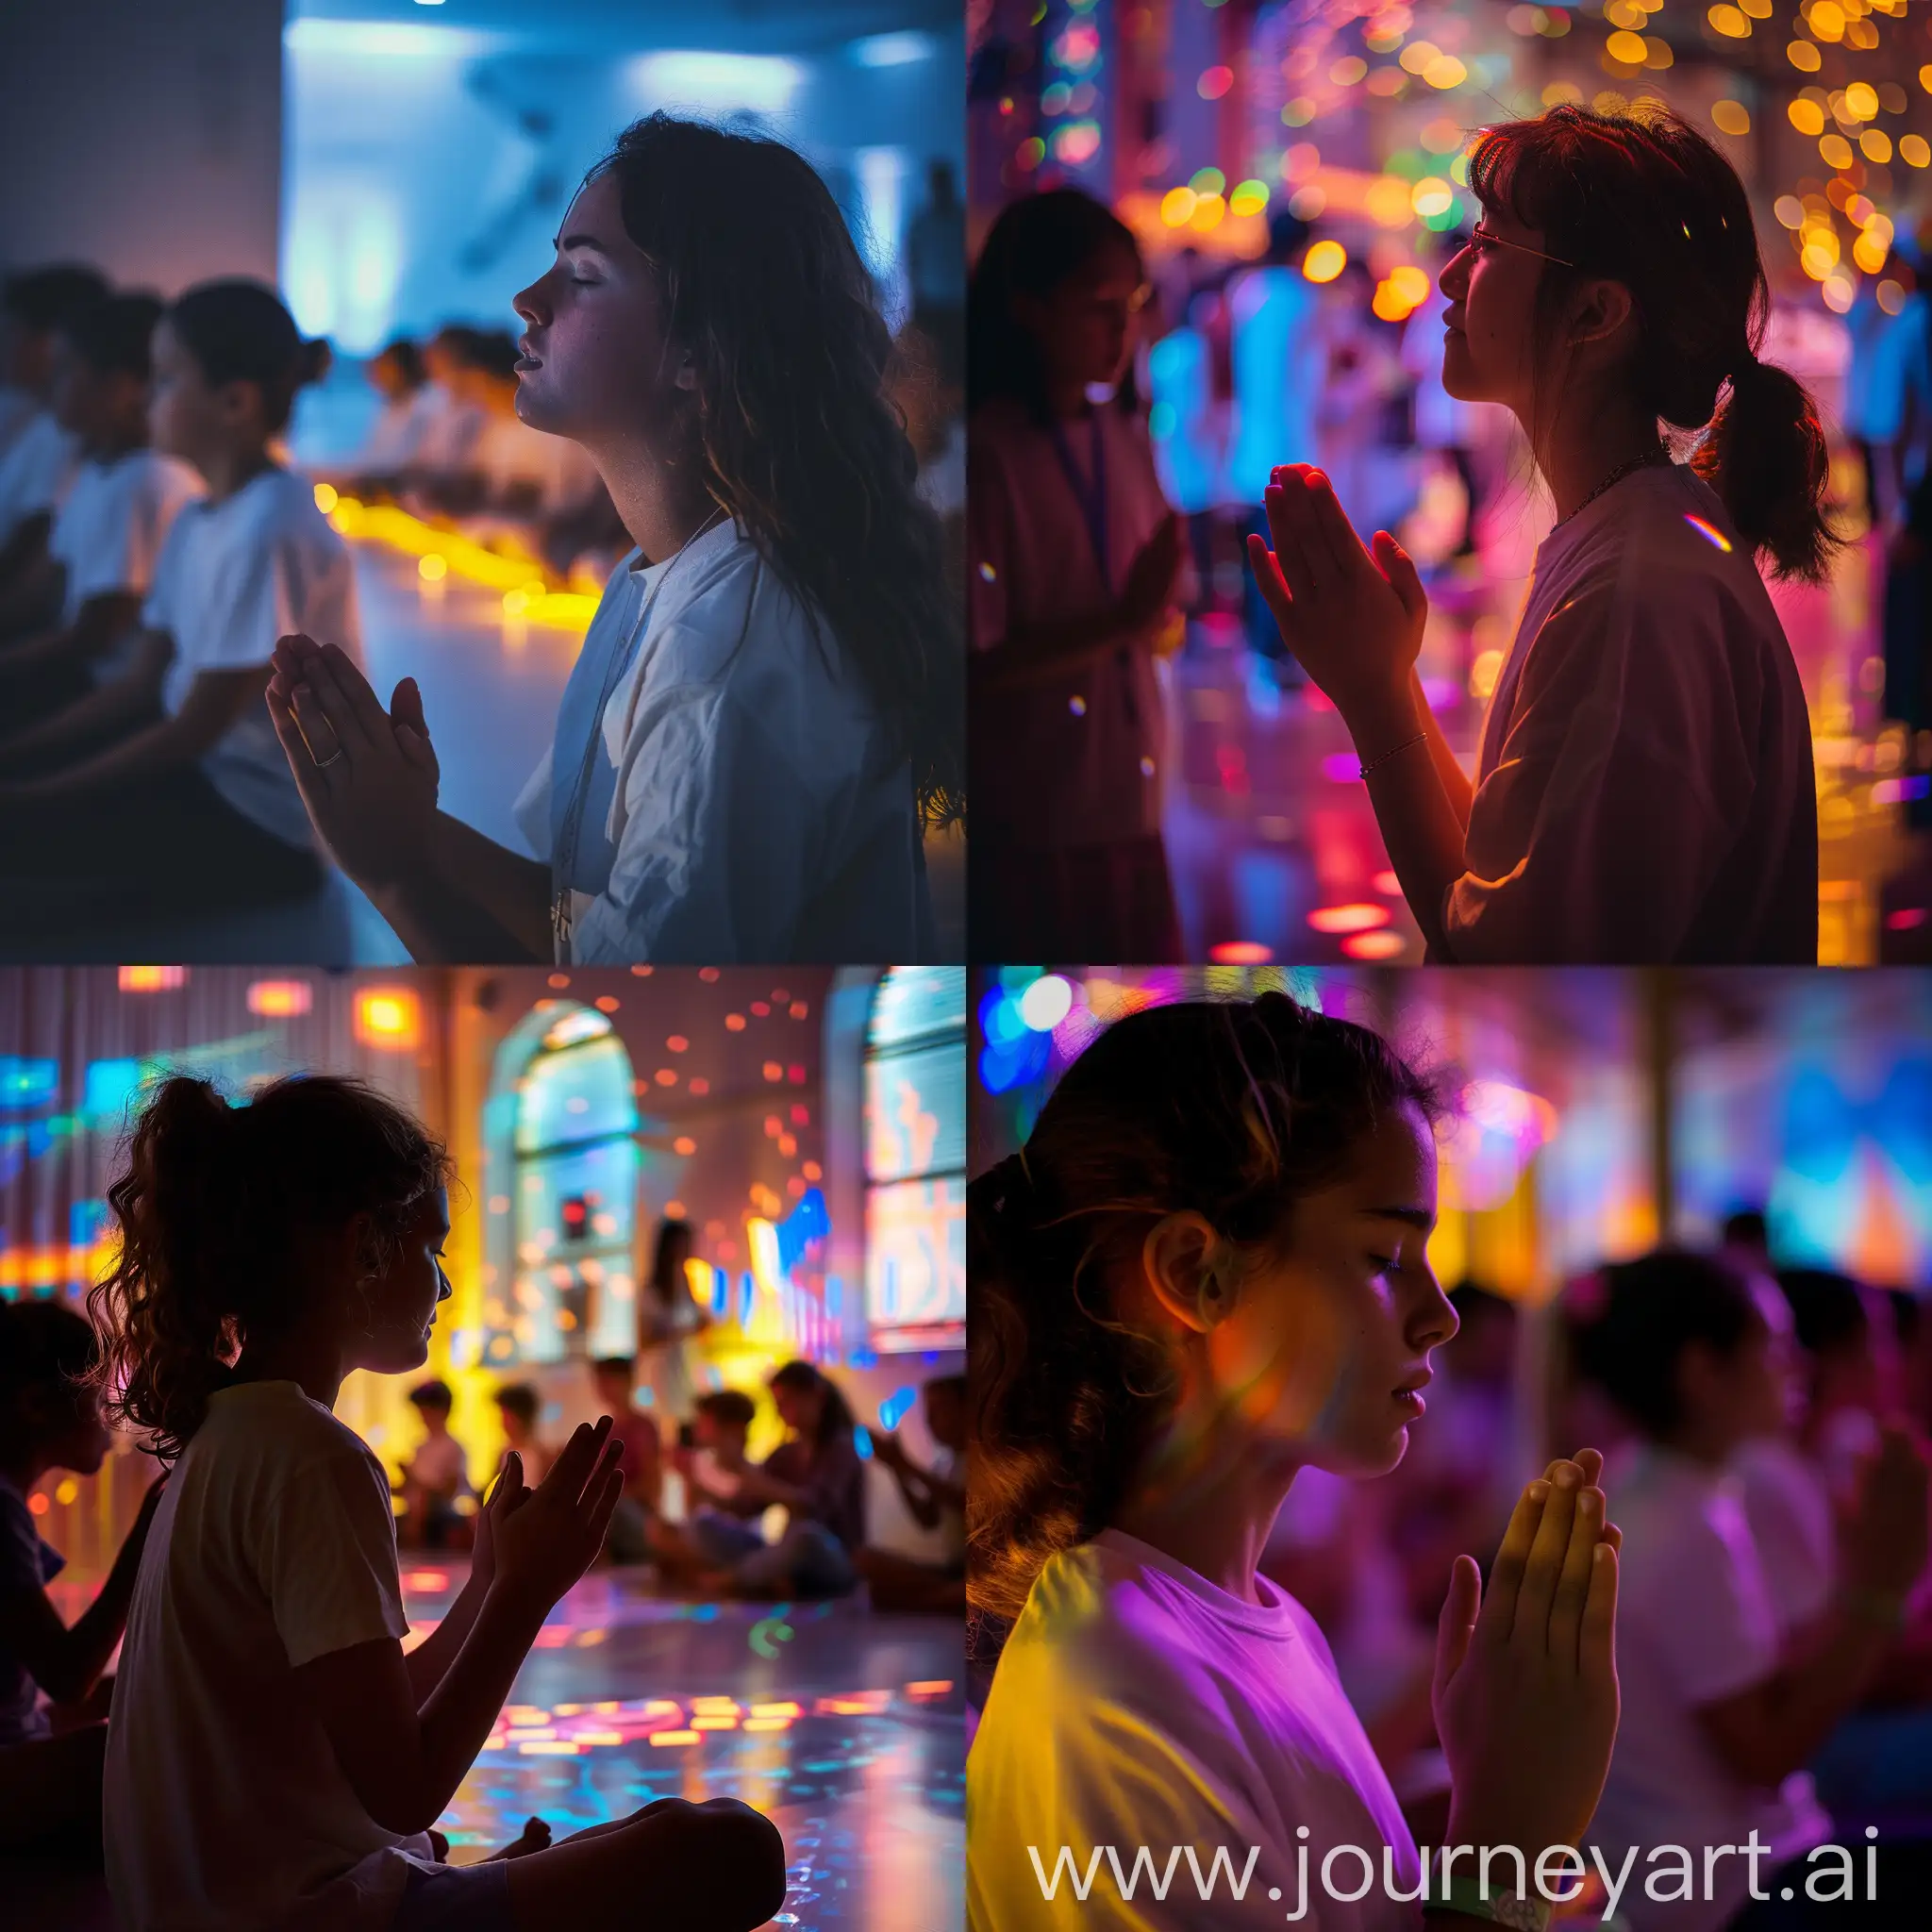 Young-Catholics-Engaging-in-Prayerful-Activities-in-Illuminated-Room